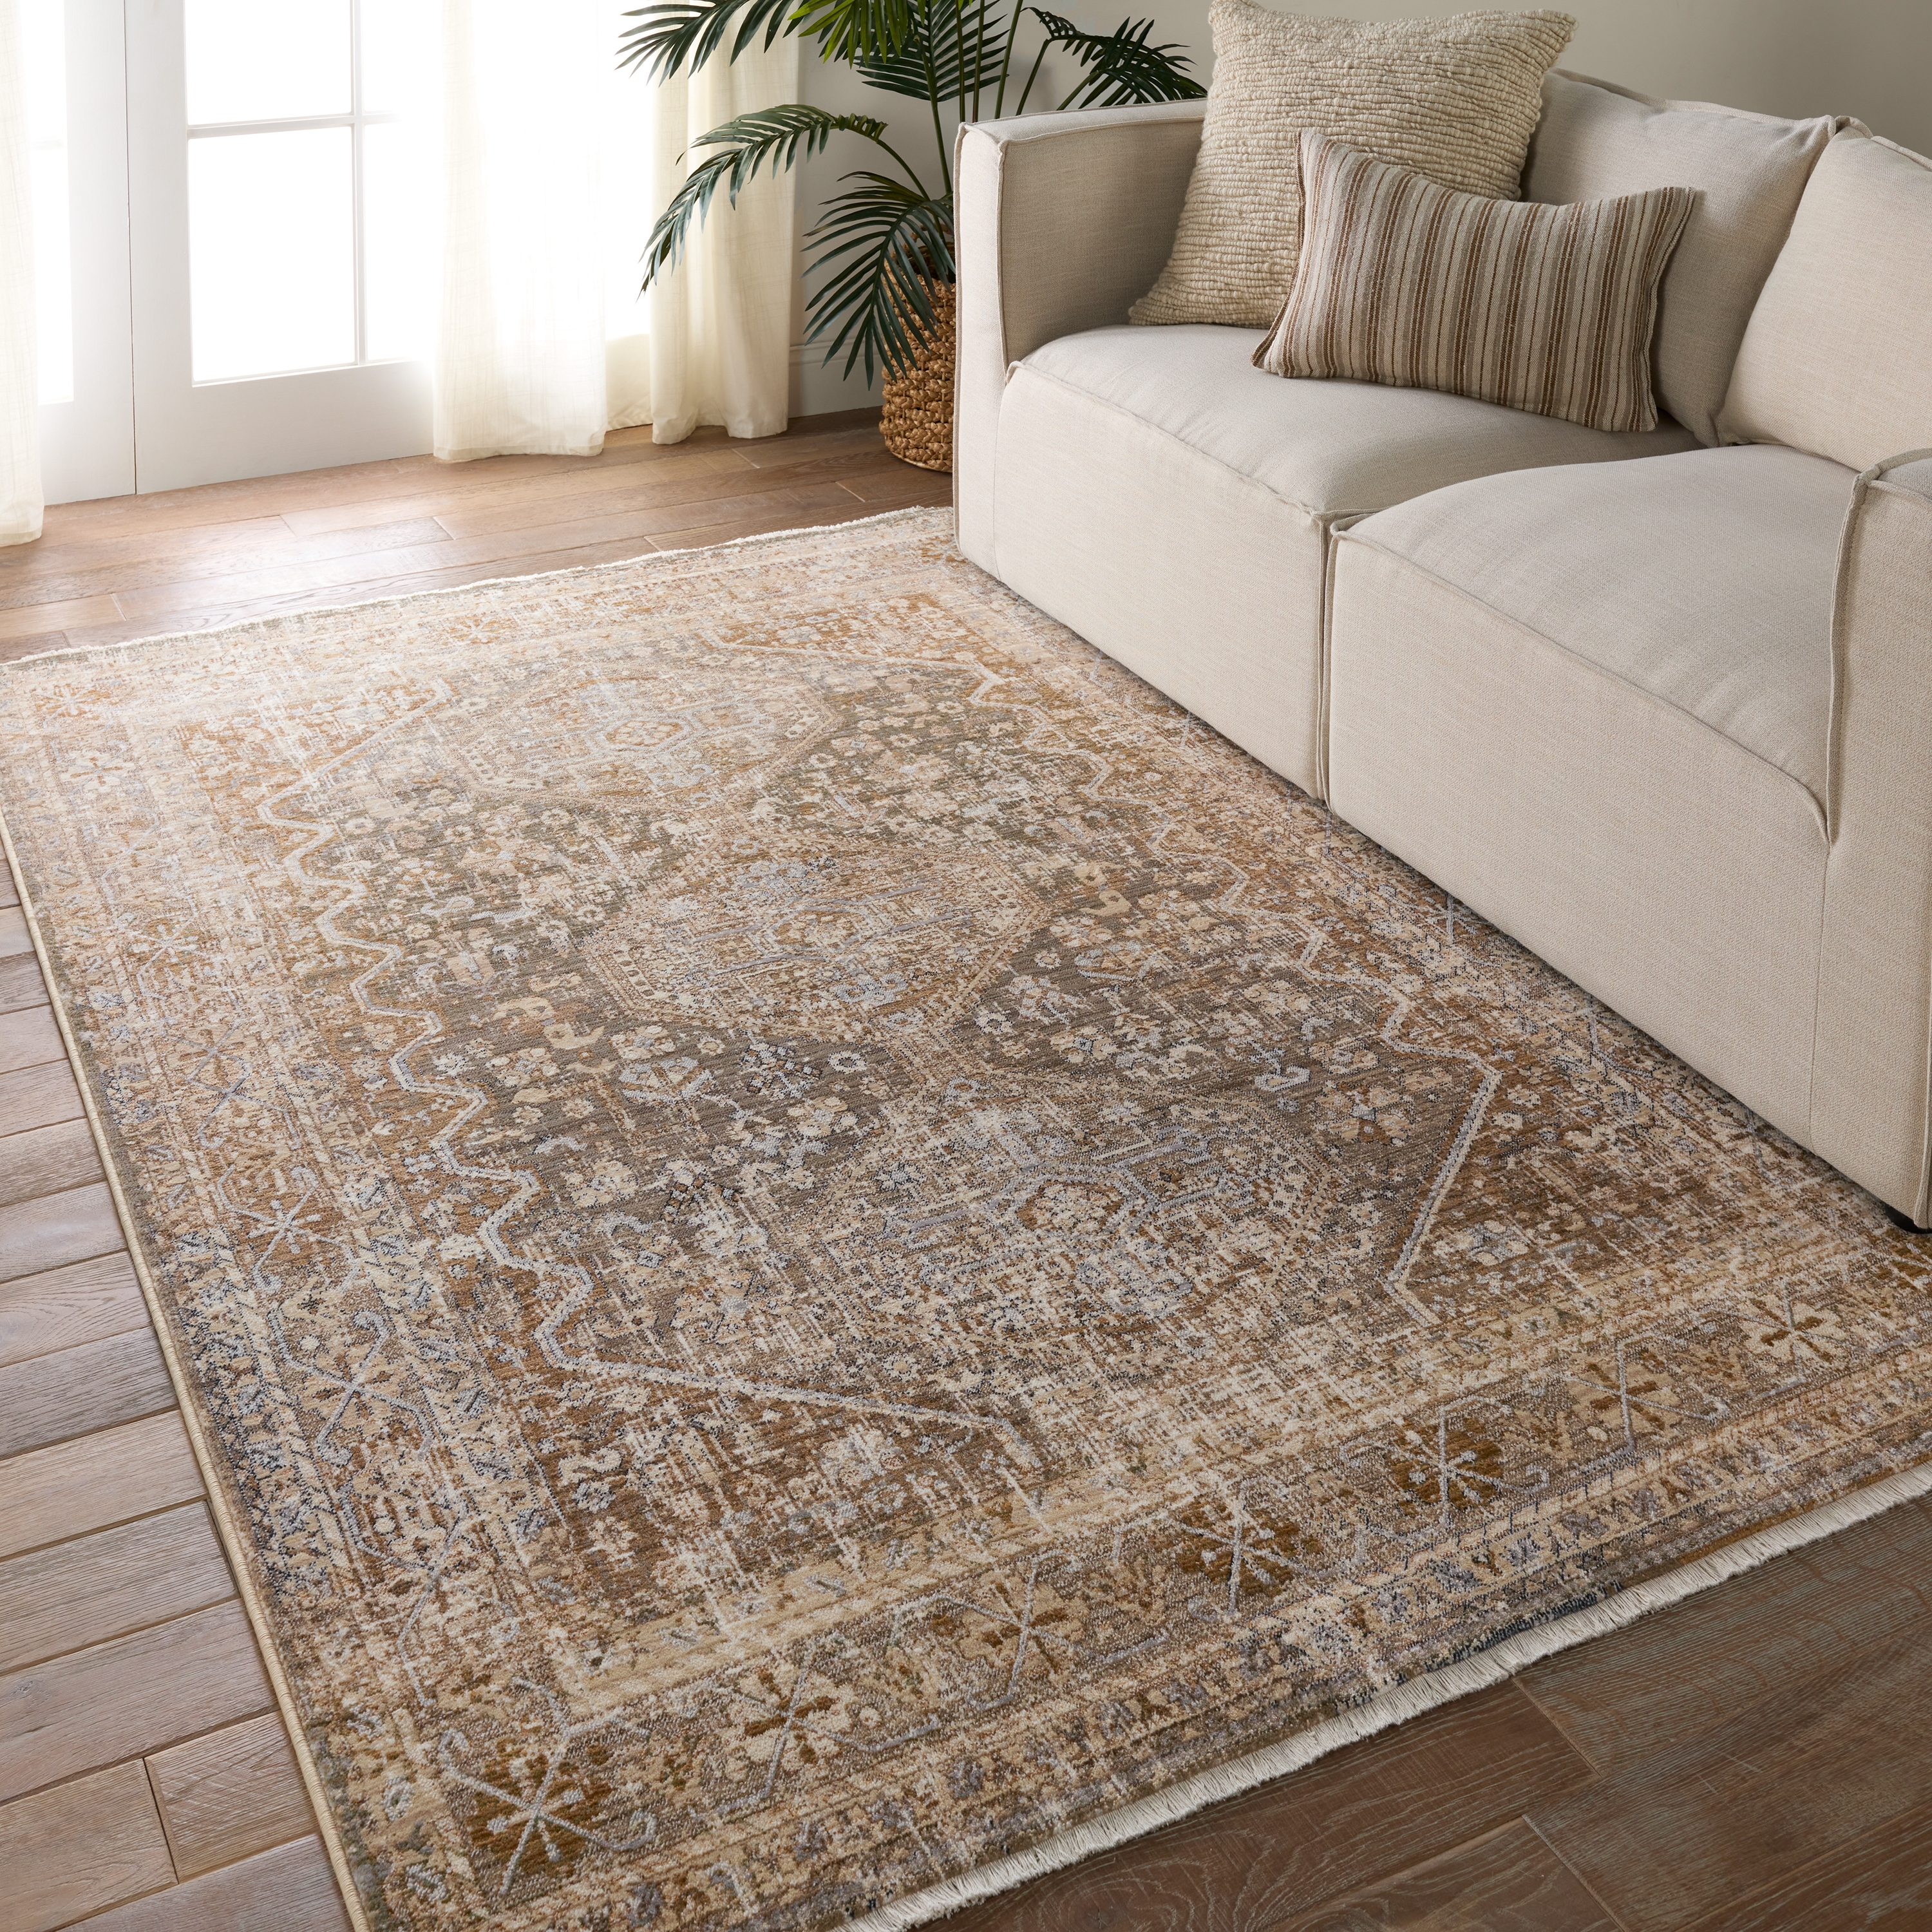 Vibe by Zakaria Medallion Tan/Taupe Area Rug (5'X8') - Image 4